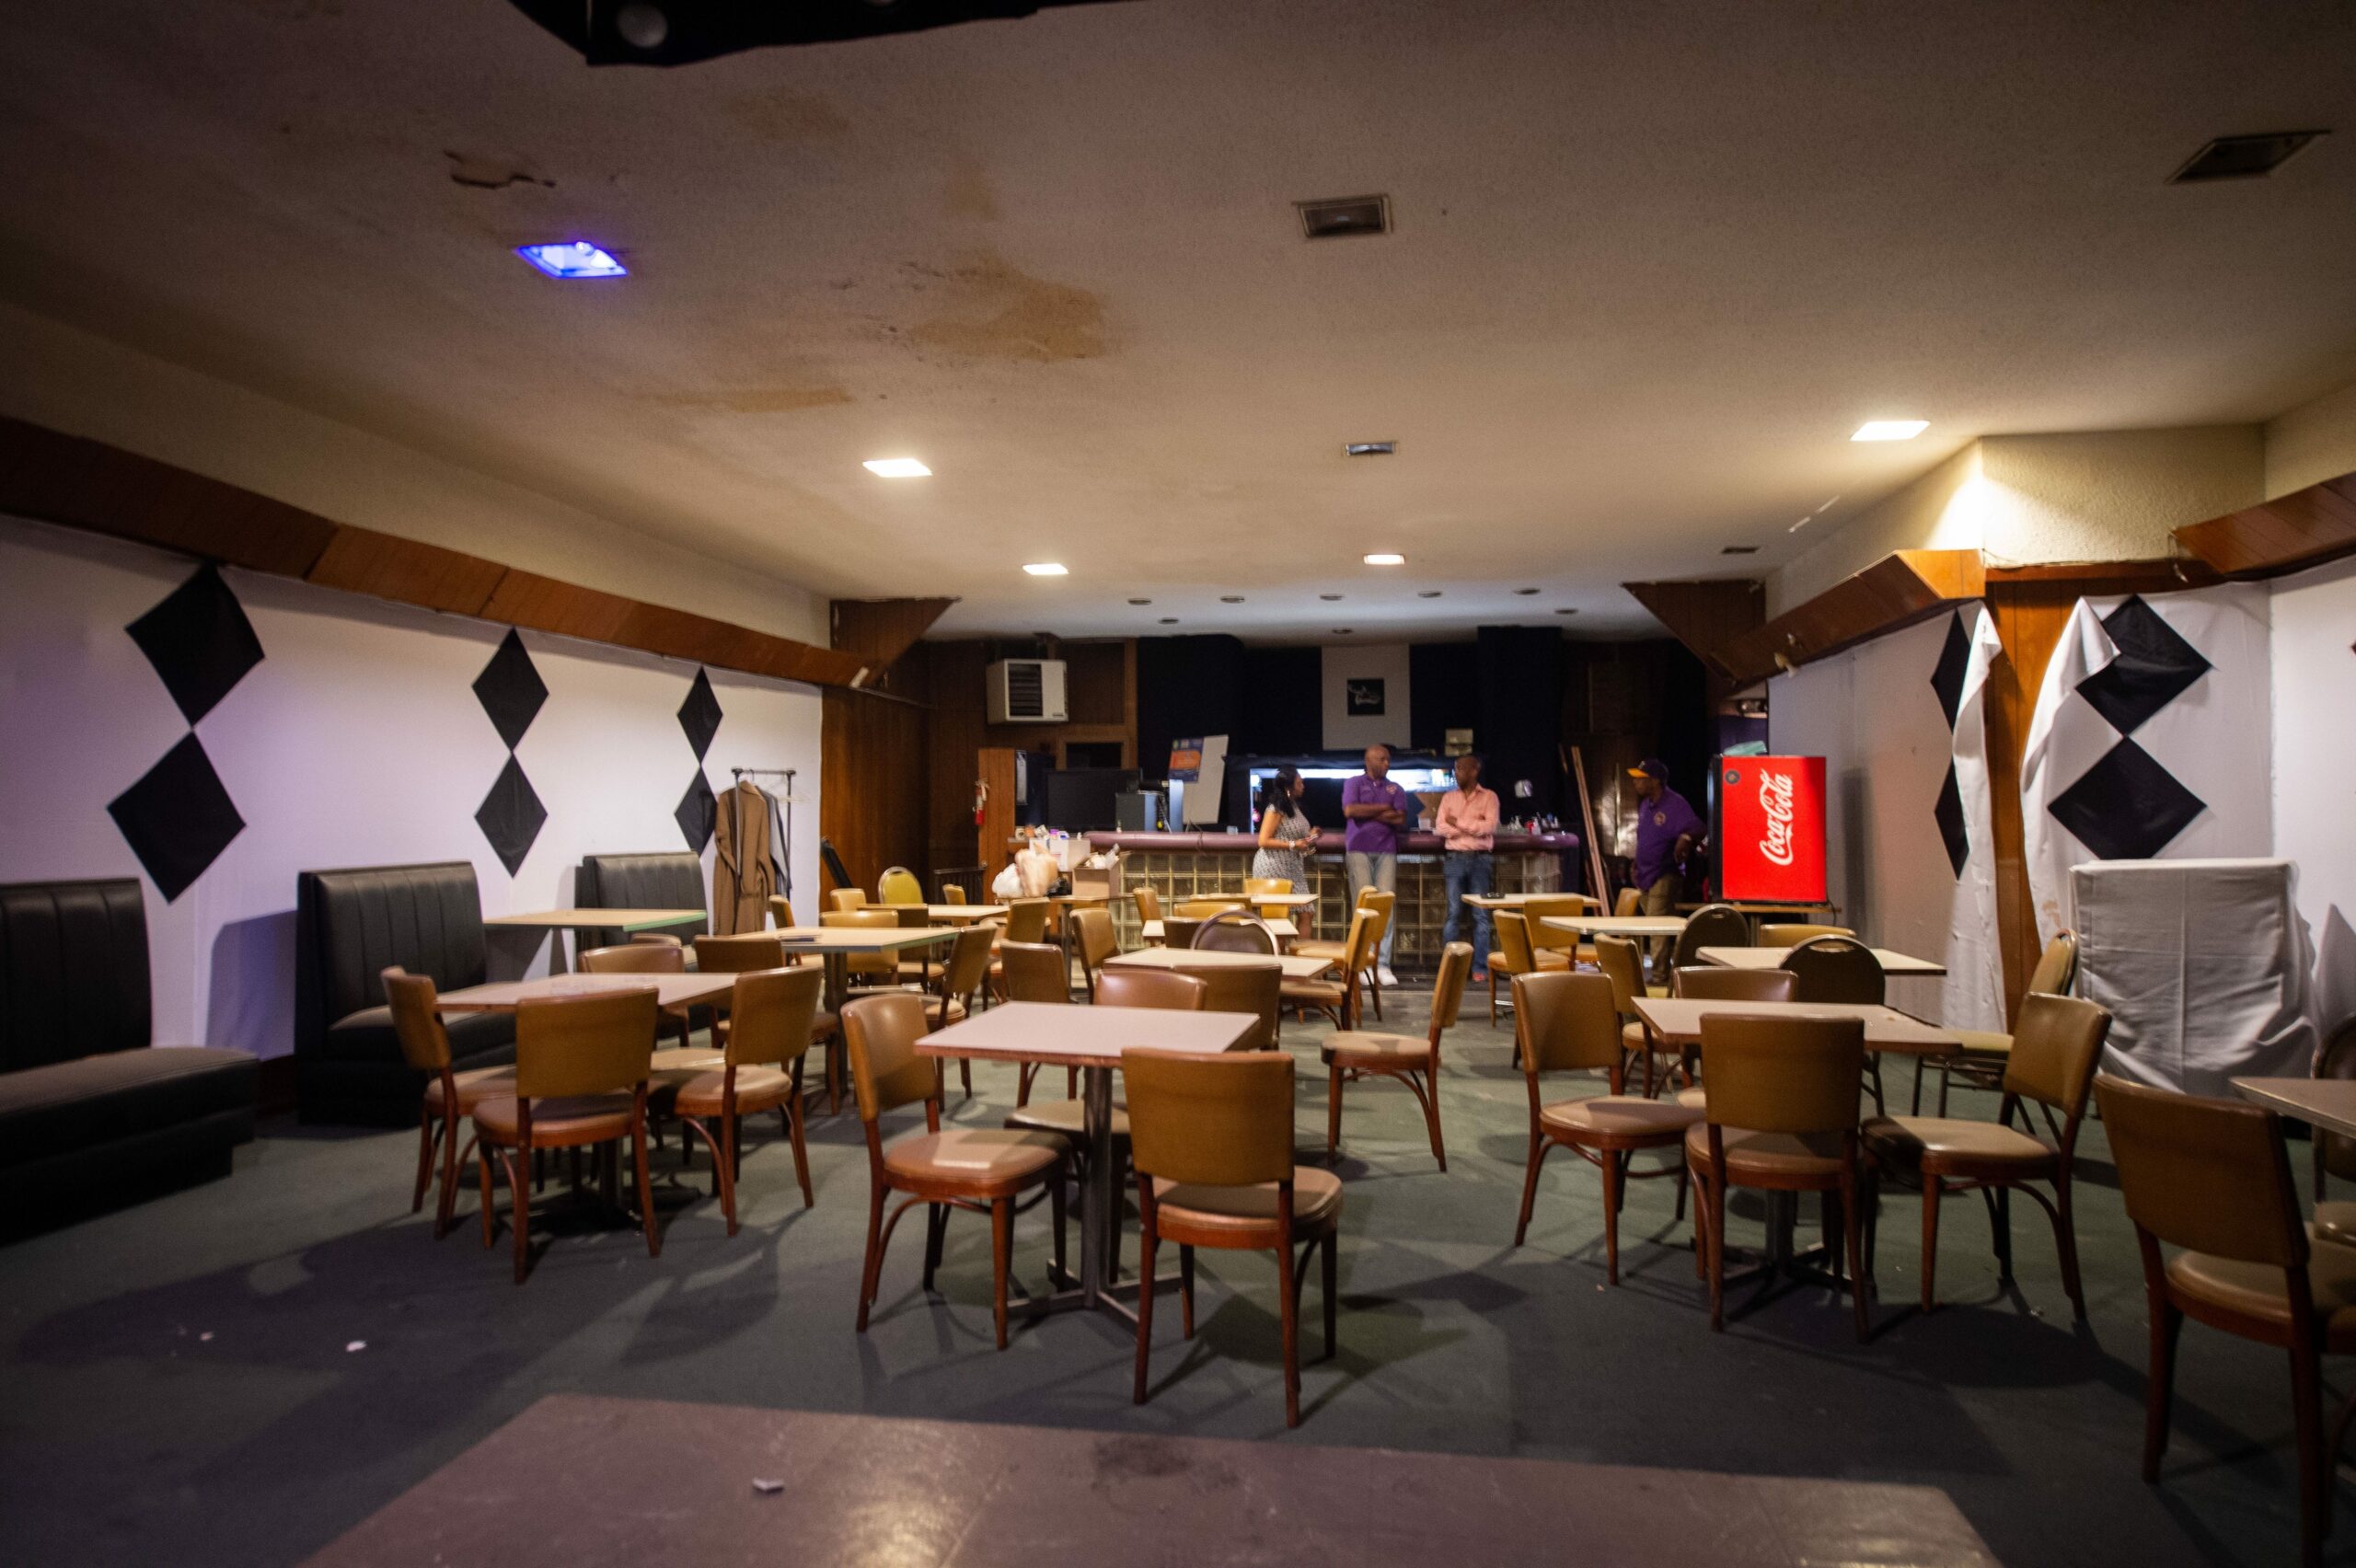 Club Baron renovation aims to preserve North Nashville's history and indie music legacy